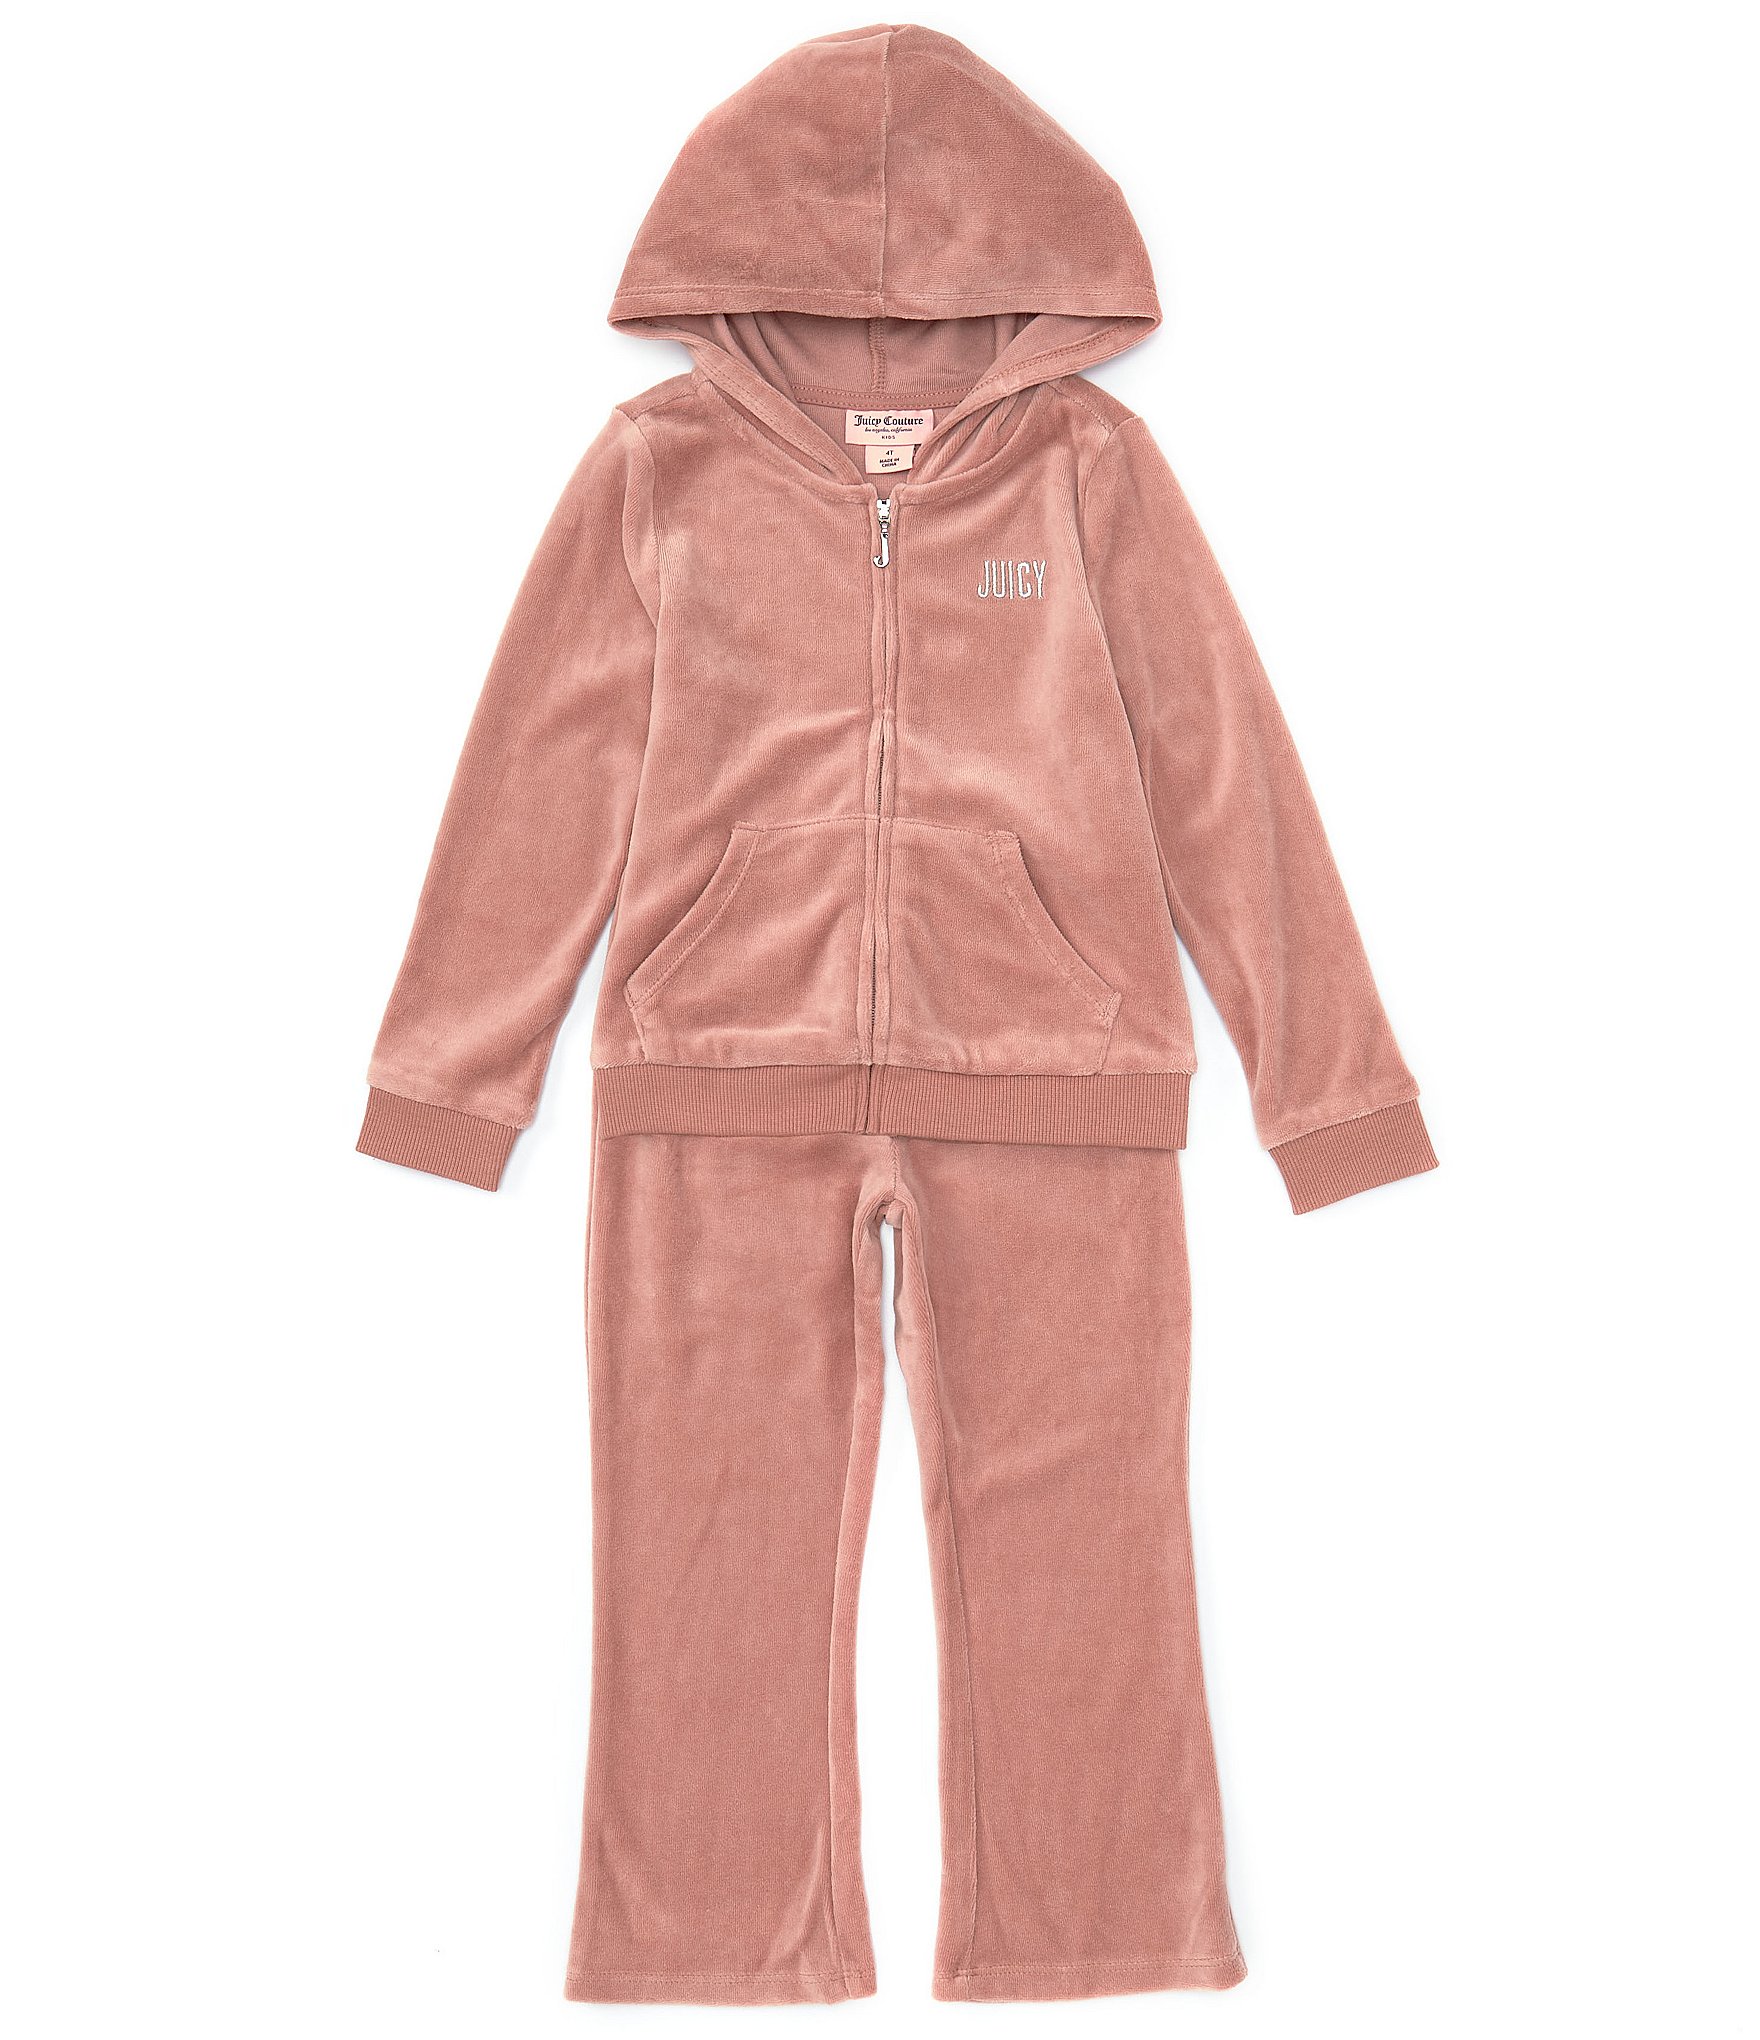 Juicy Couture velour straight leg trackies and hoodie set in cotton candy